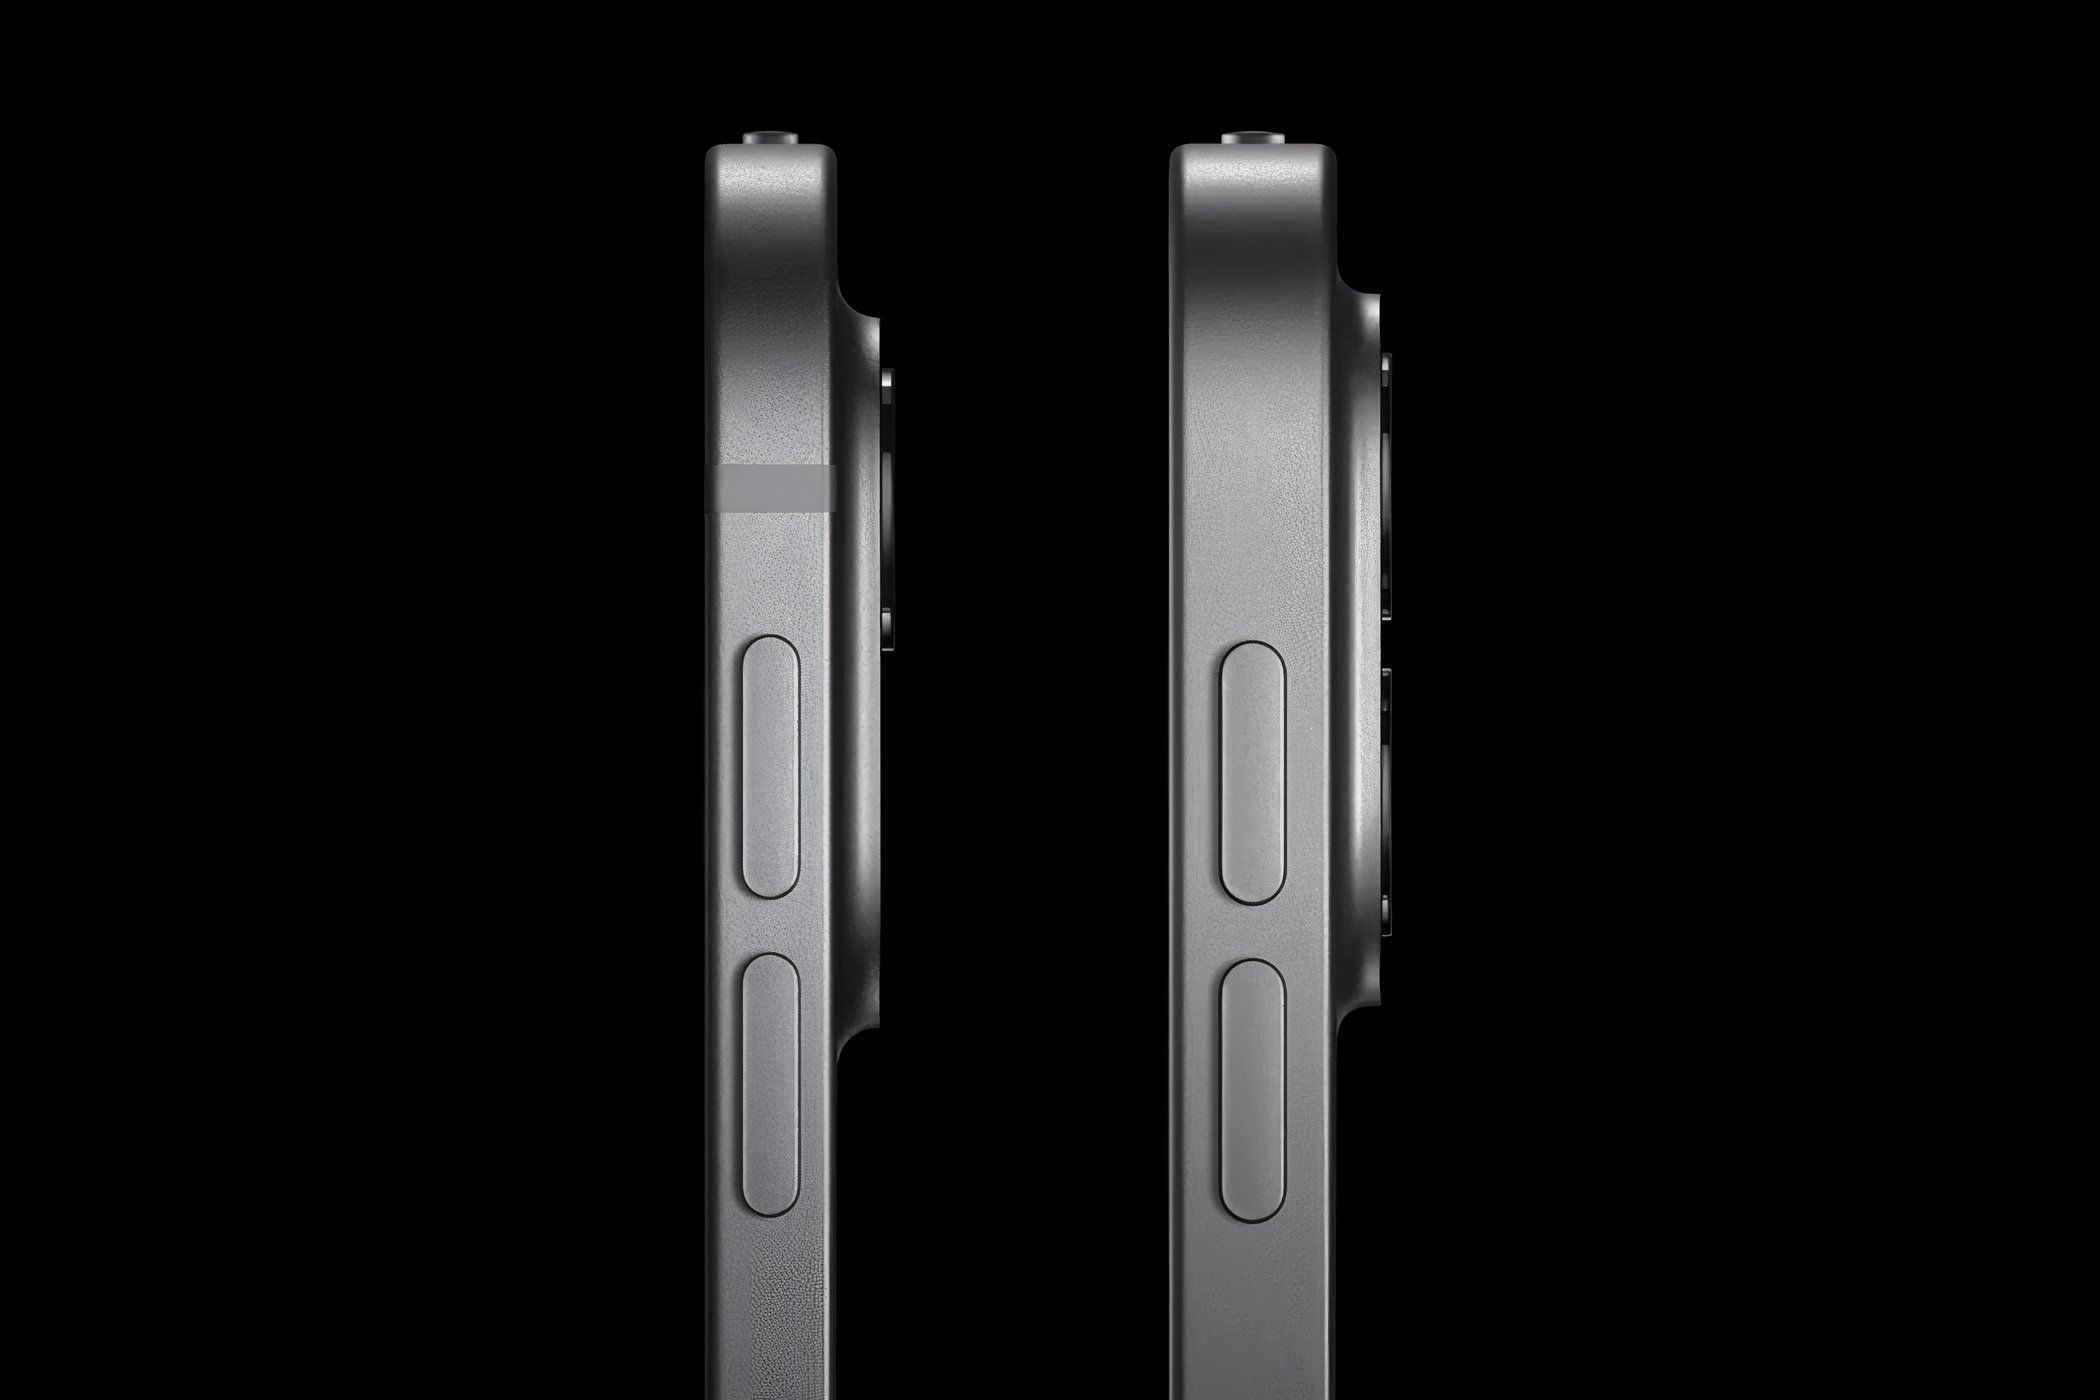 Image of the M4 iPad Pro's on the left and the M2 iPad Pro on the right, comparing their thickness.